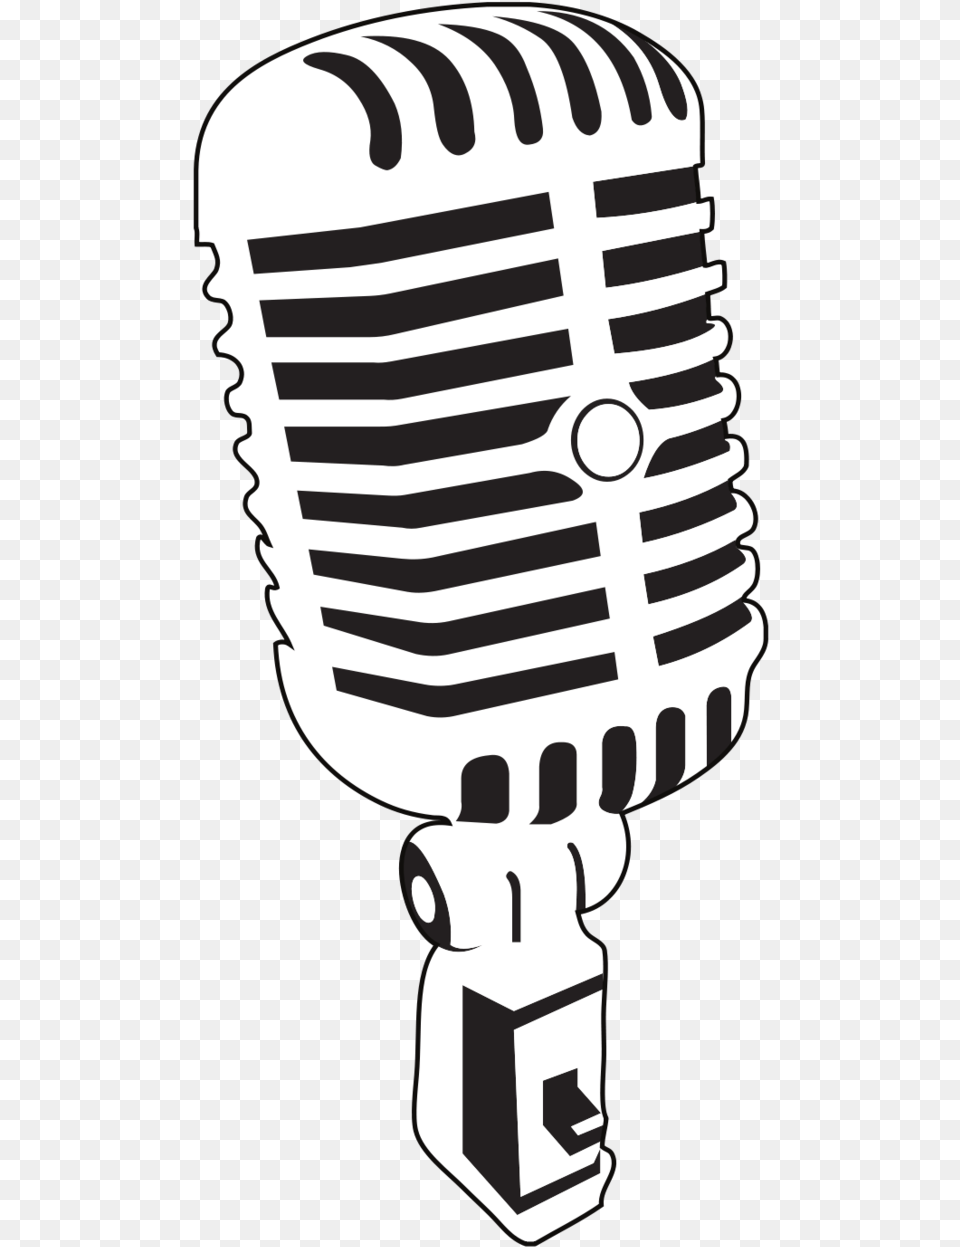 Download Hd Clipart Resolution Vintage Microphone Microphone Drawing, Electrical Device, Baby, Person Png Image